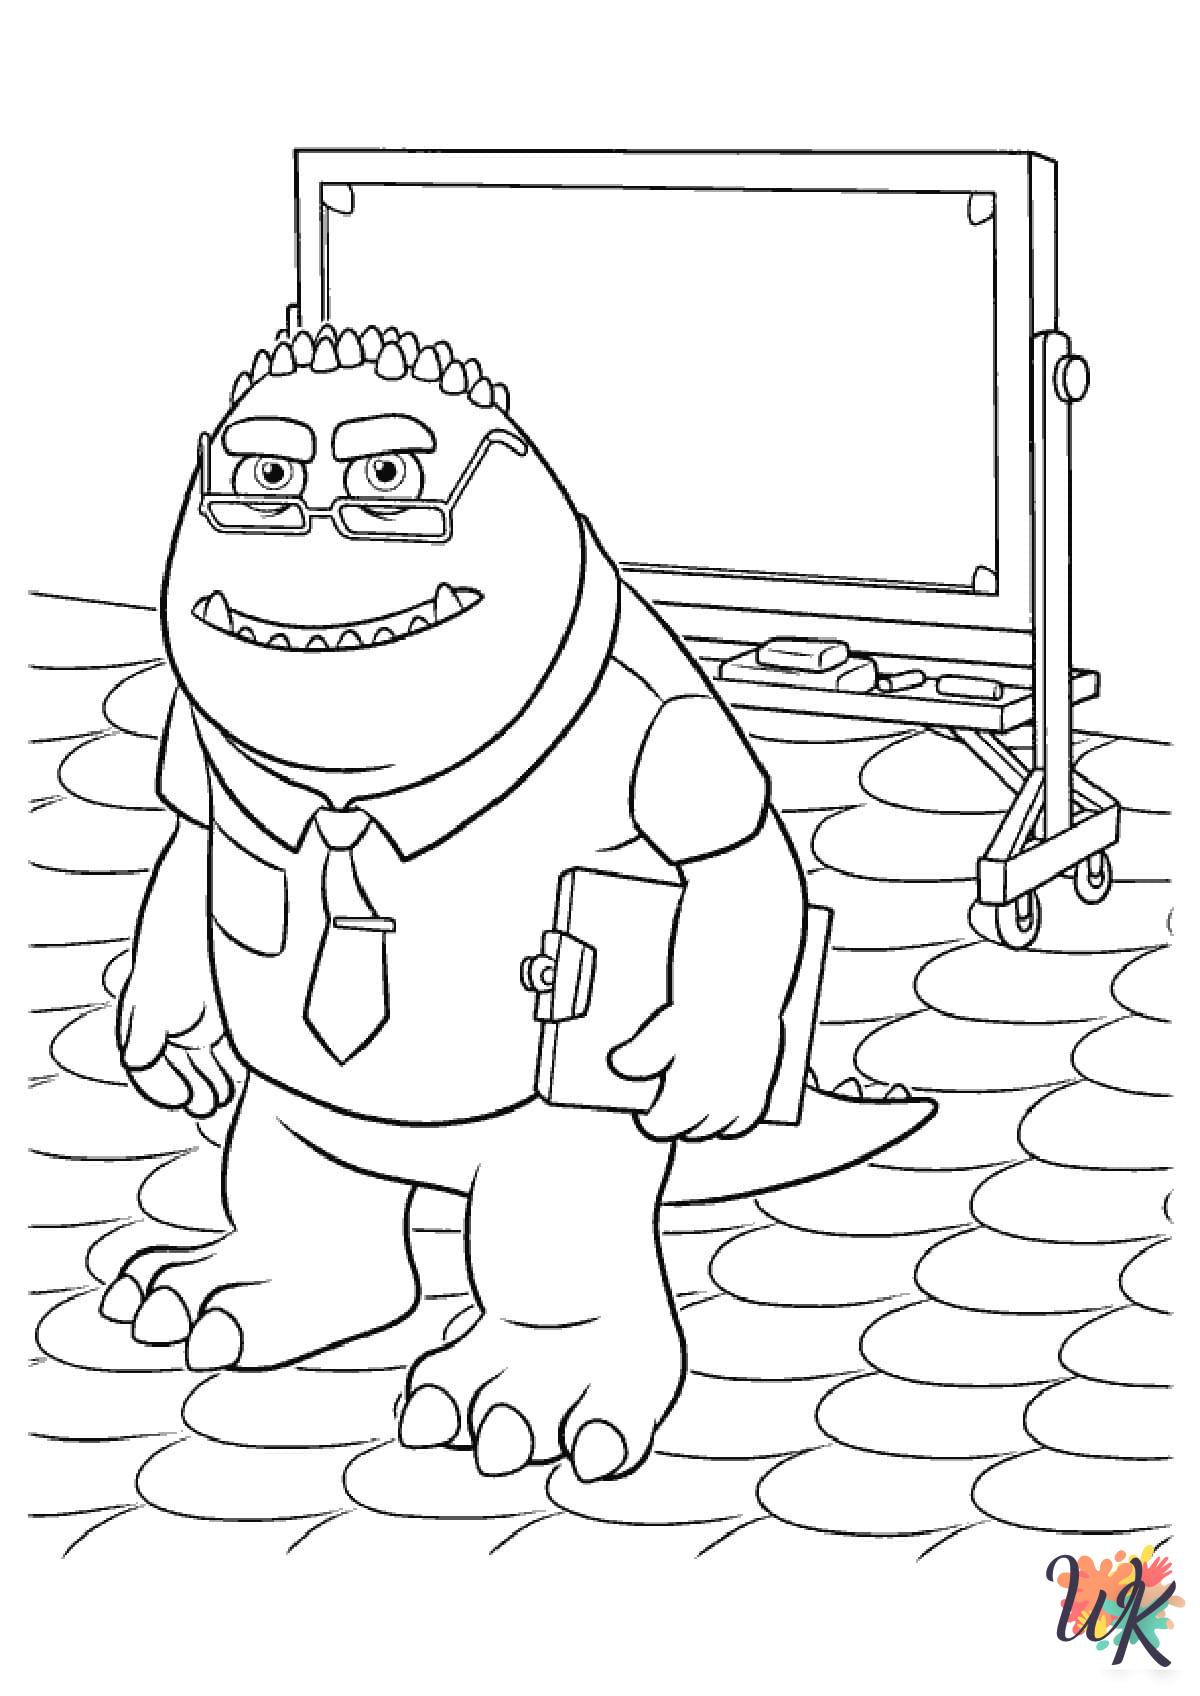 Monsters Inc. coloring pages printable